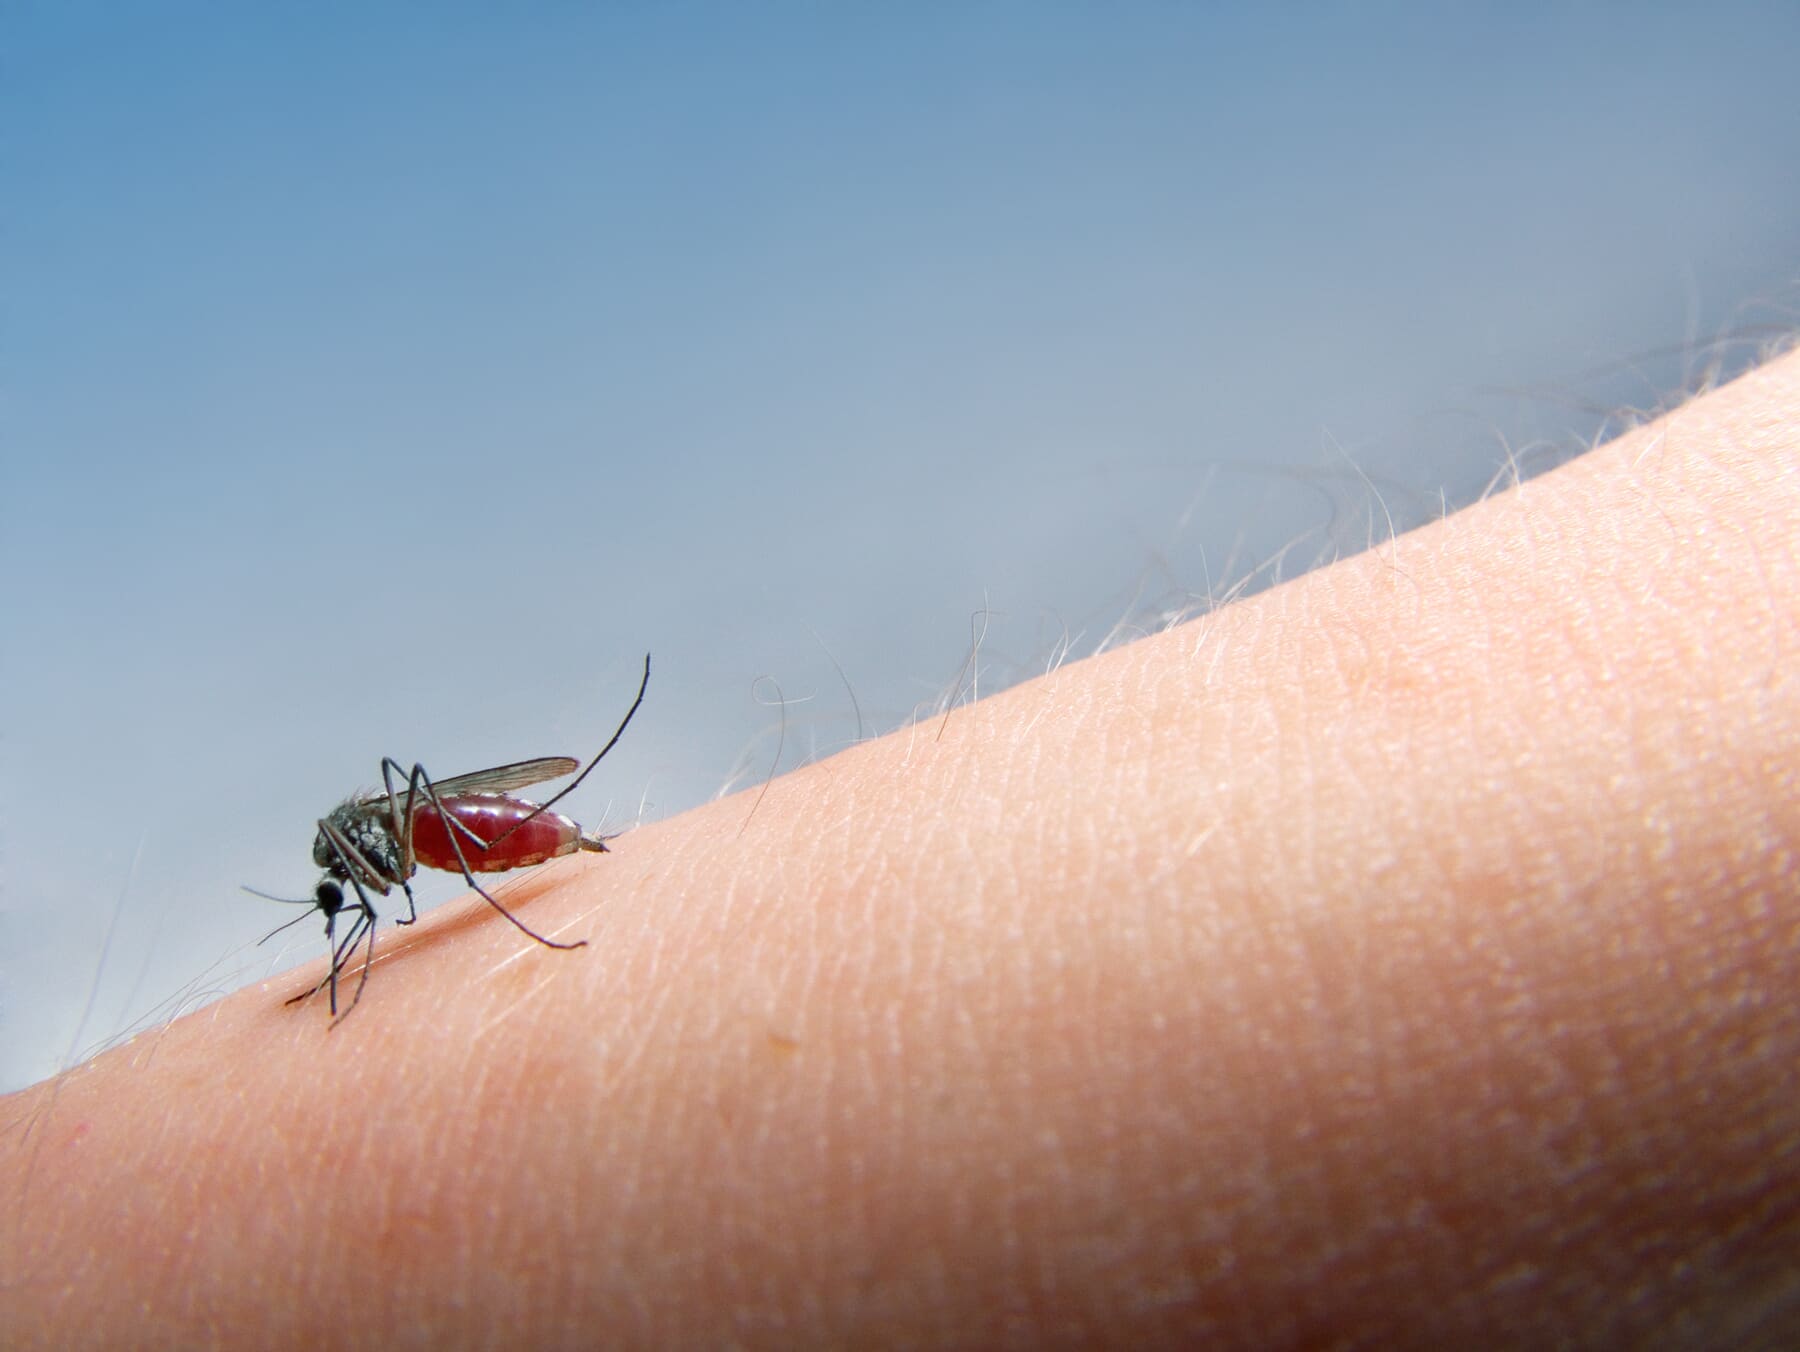 Mosquito sucking blood from someone's arm.